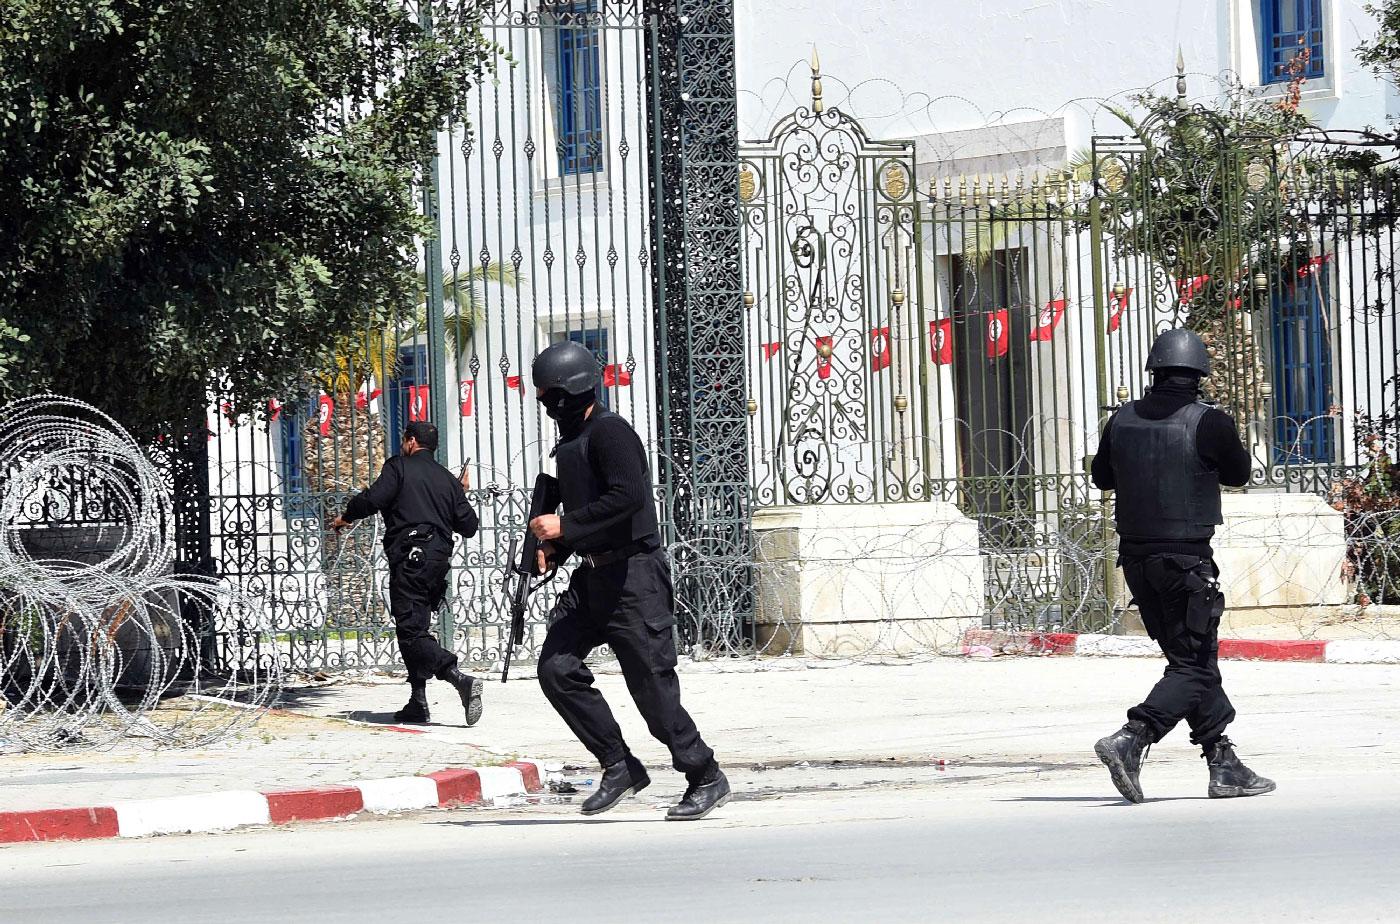 Tunisian security forces secure the area after gunmen attacked Tunis' famed Bardo Museum on March 18, 2015.